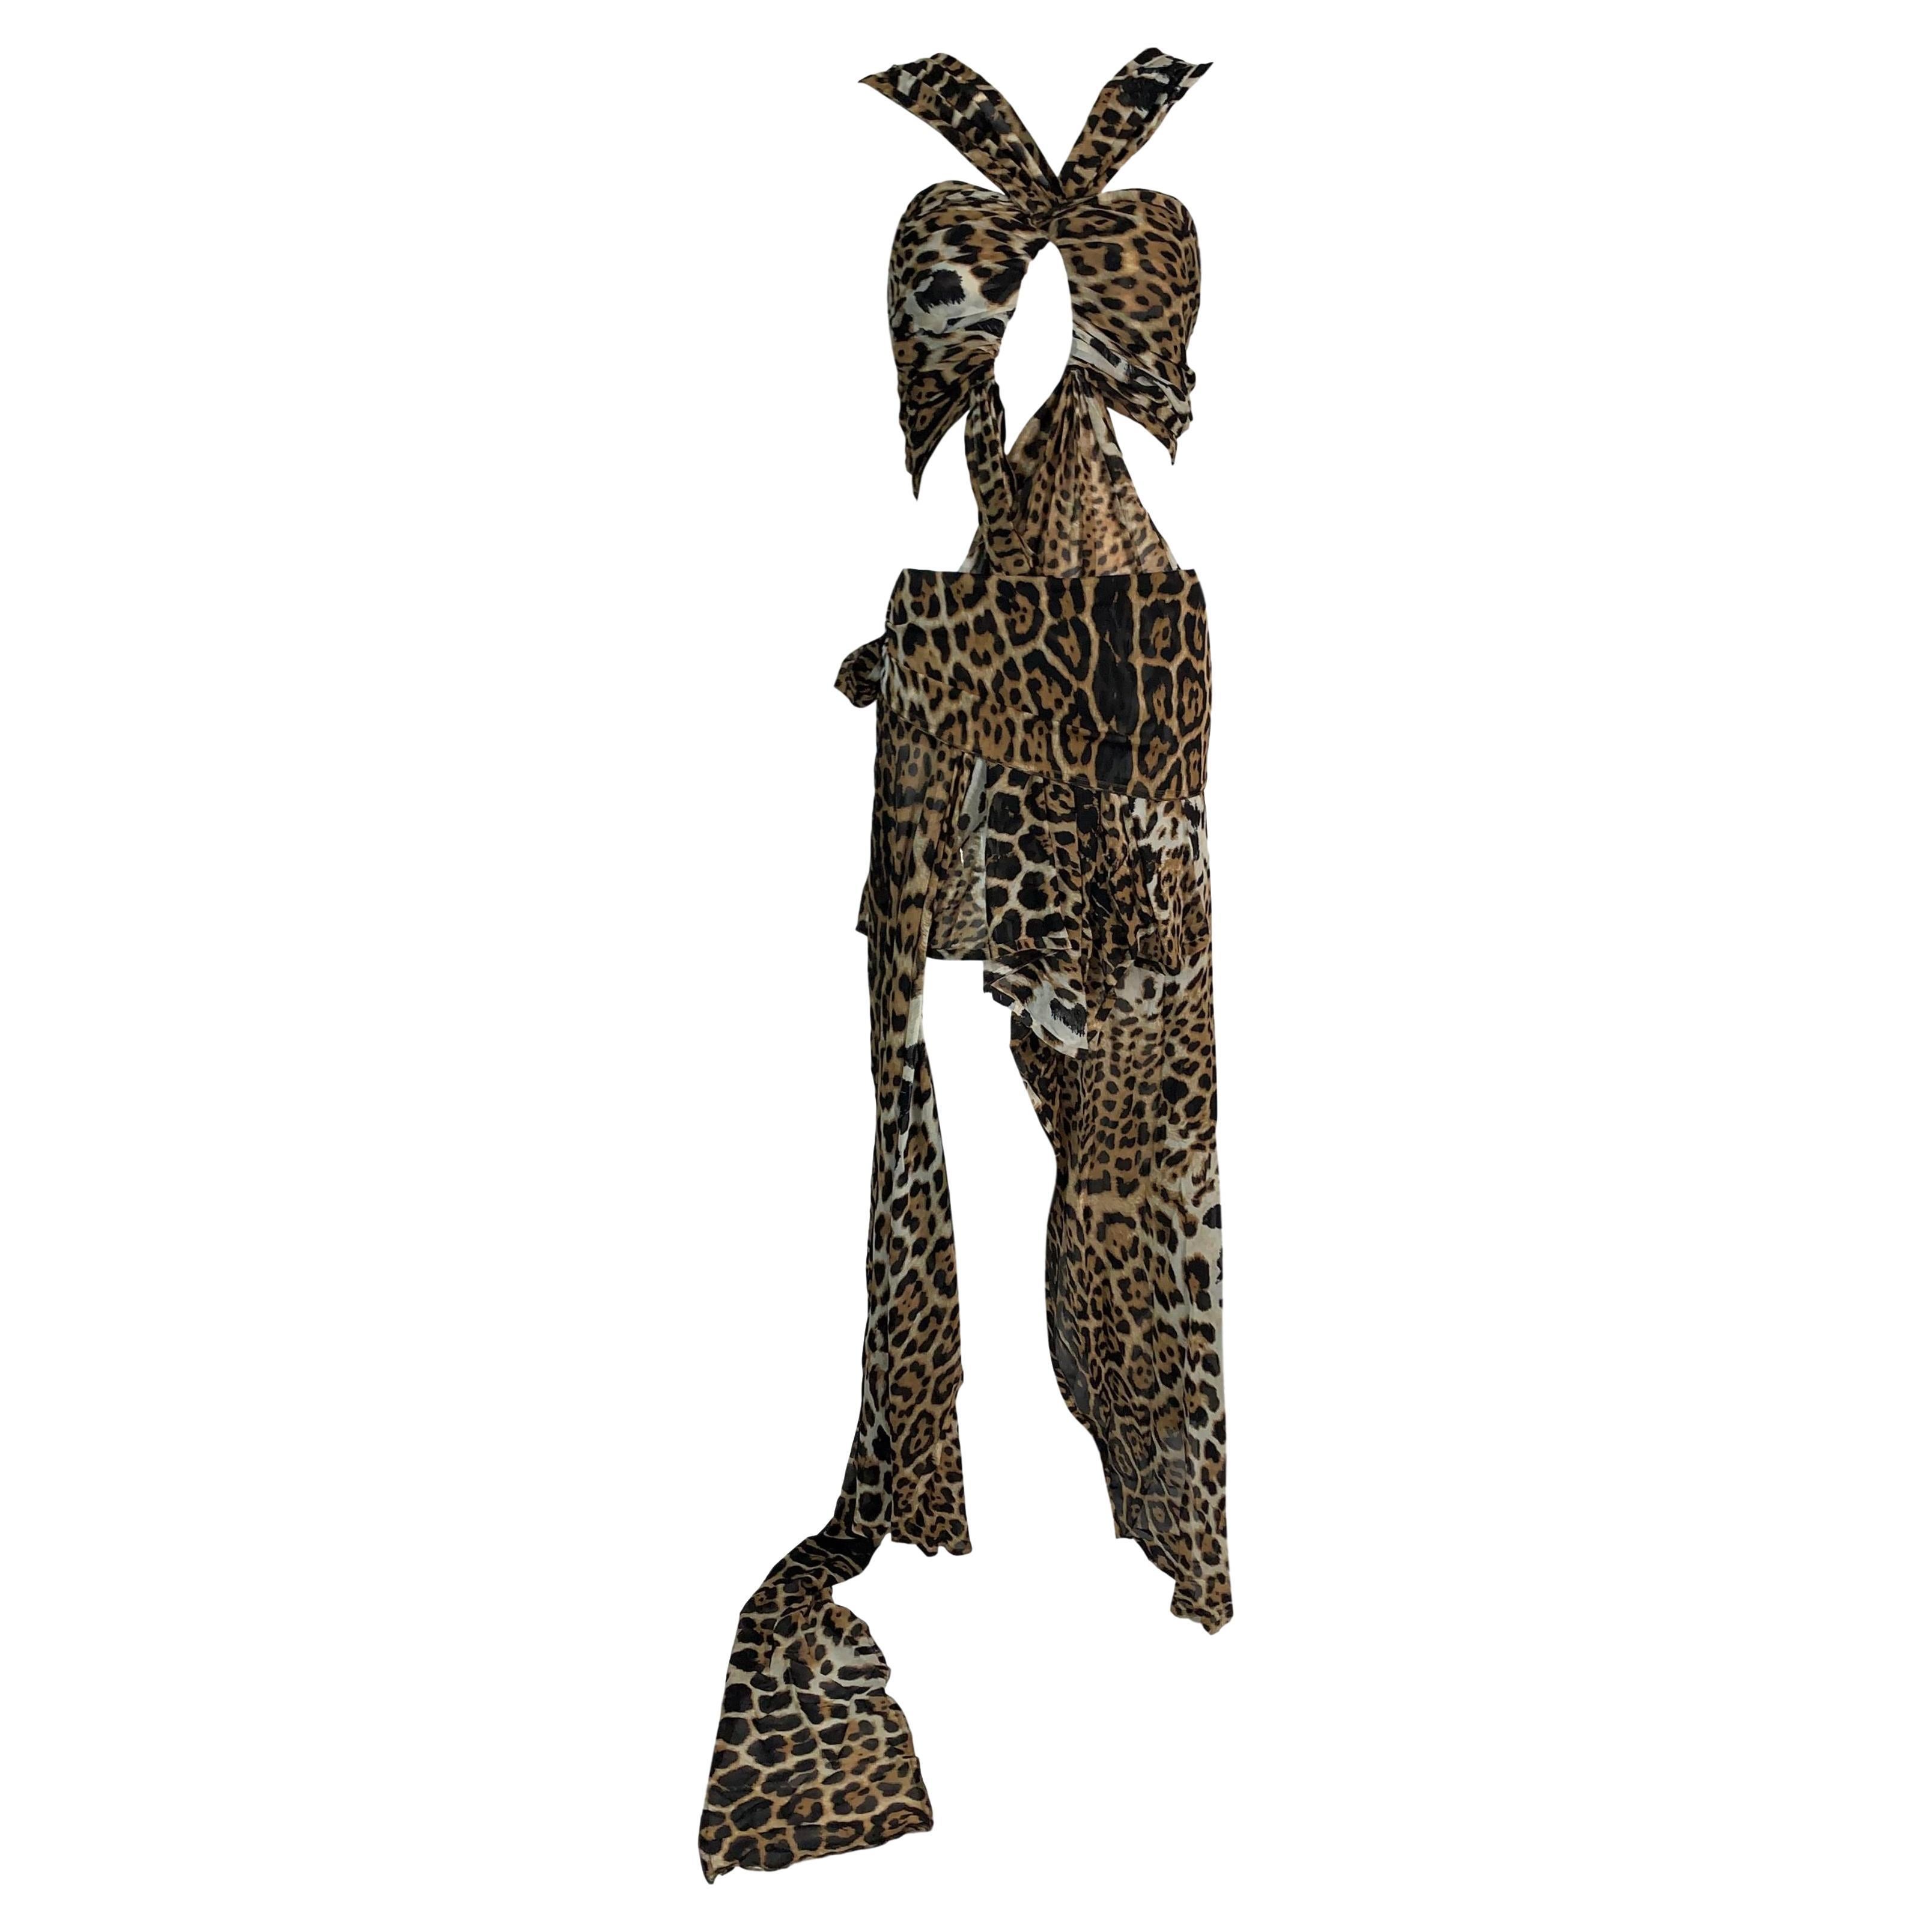 S/S 2002 Yves Saint Laurent Tom Ford Runway Leopard Silk Cut-Out Dress Gown